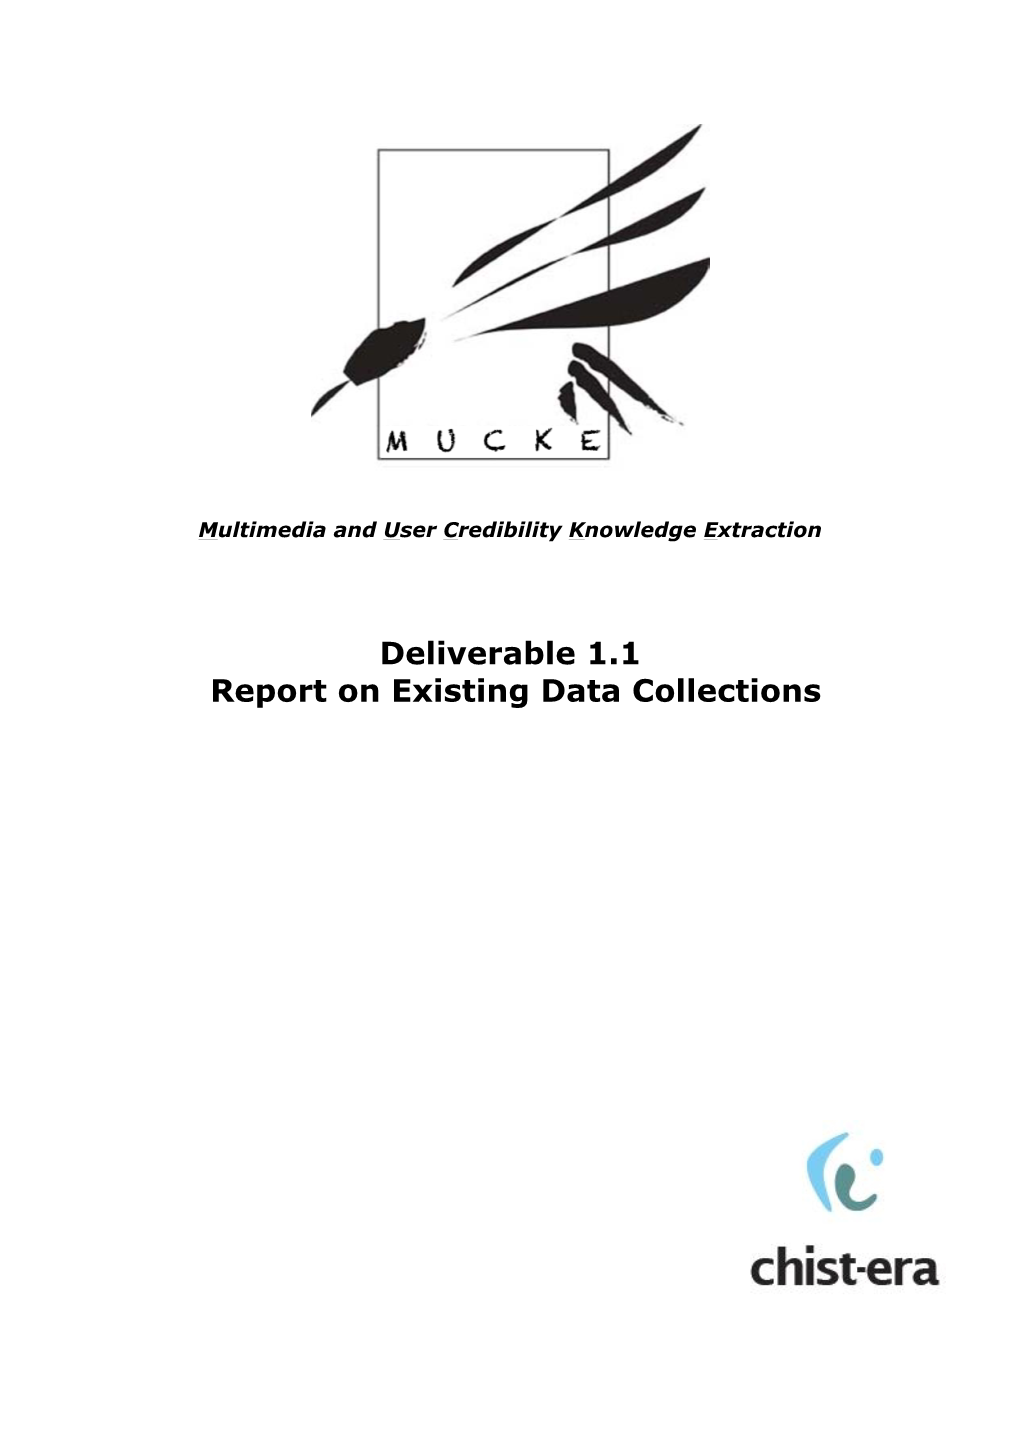 Deliverable 1.1 Report on Existing Data Collections